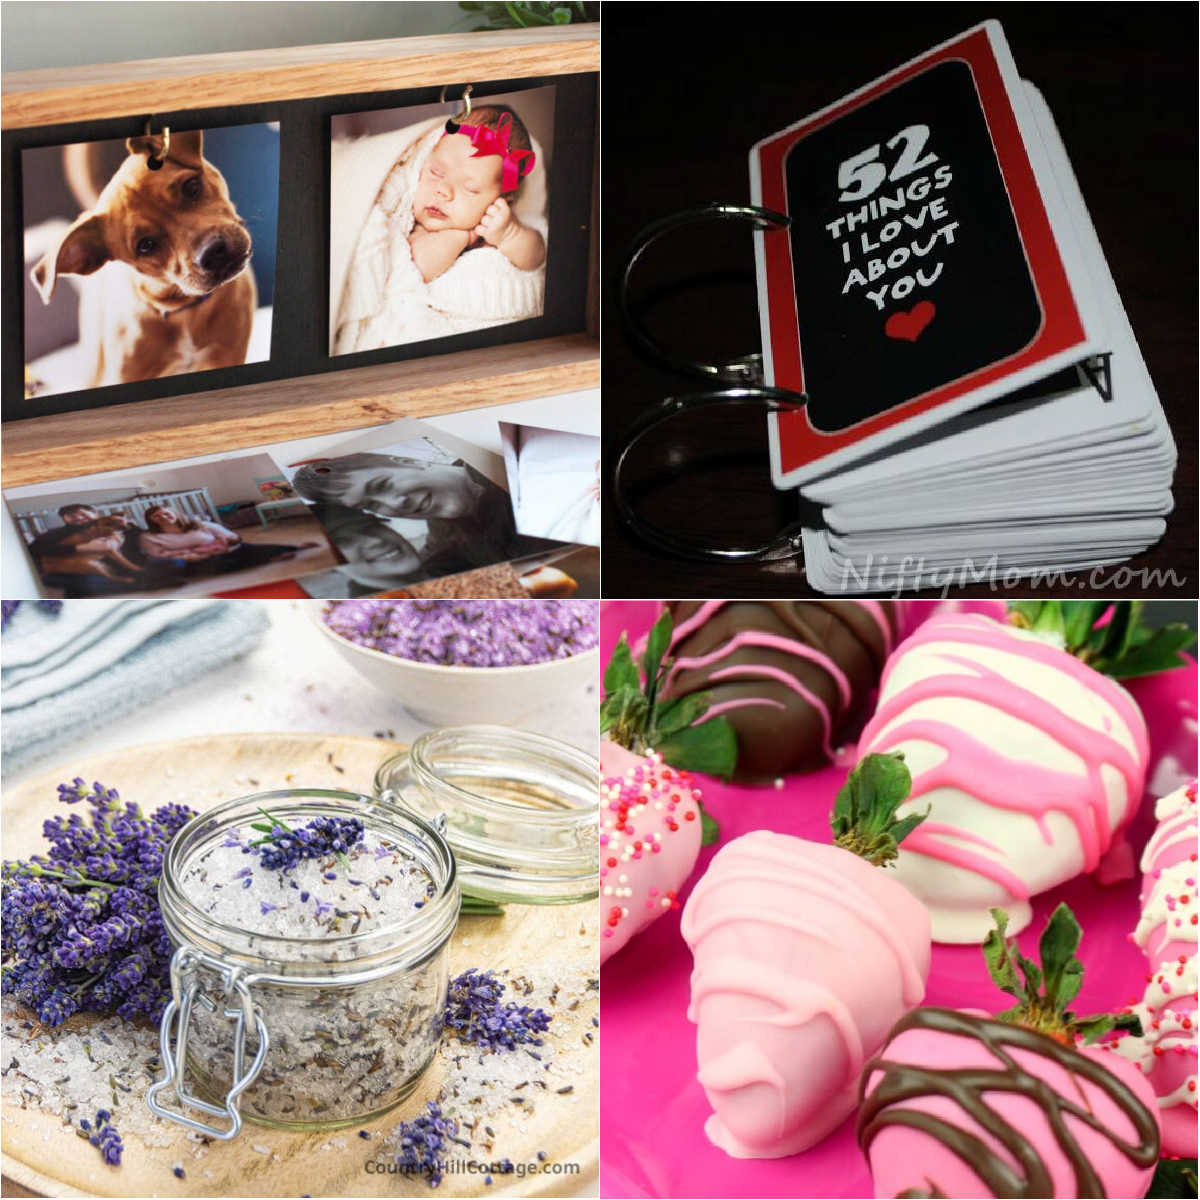 Collage: top left wood frame with 2 images, top right bound deck of cards with "52 Things I Love about you" on the front, bottom right chocolate covered strawberries, bottom left a jar with lavender bath salt.